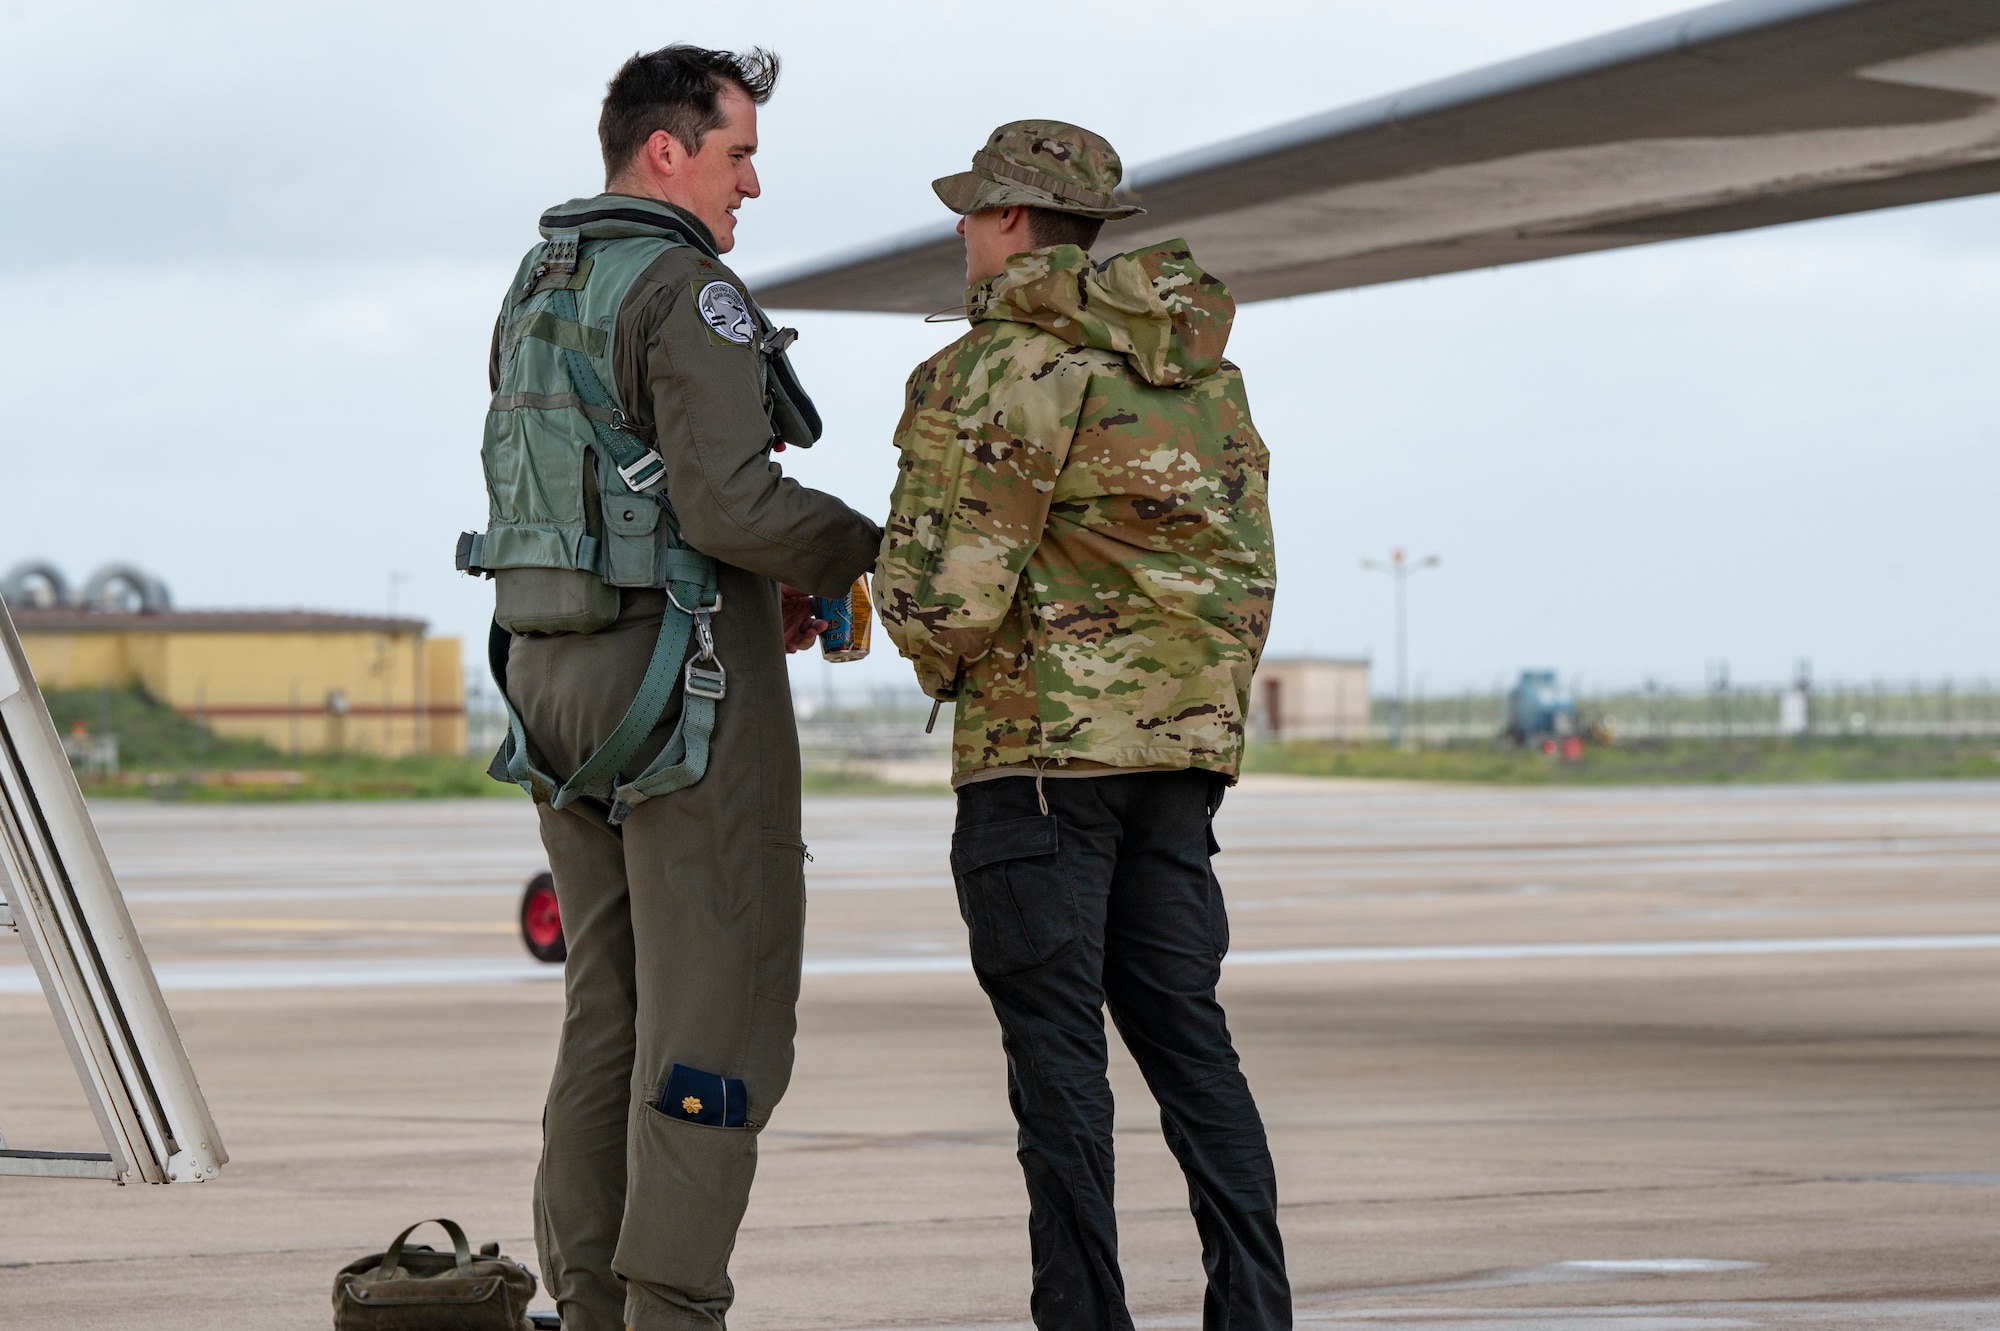 U.S. Air Force Maj. Stephen Carey, 9th Expeditionary Bomb Squadron Pilot, talks with Airman 1st Class Caden Egan, 9th EBS crew chief at Morón Air Base, Spain, during Bomber Task Force Europe, March 28, 2024. BTF missions familiarize aircrew with air bases and operations in different geographic areas of operation. (U.S. Air Force Photo by Airman 1st Class Emma Anderson)